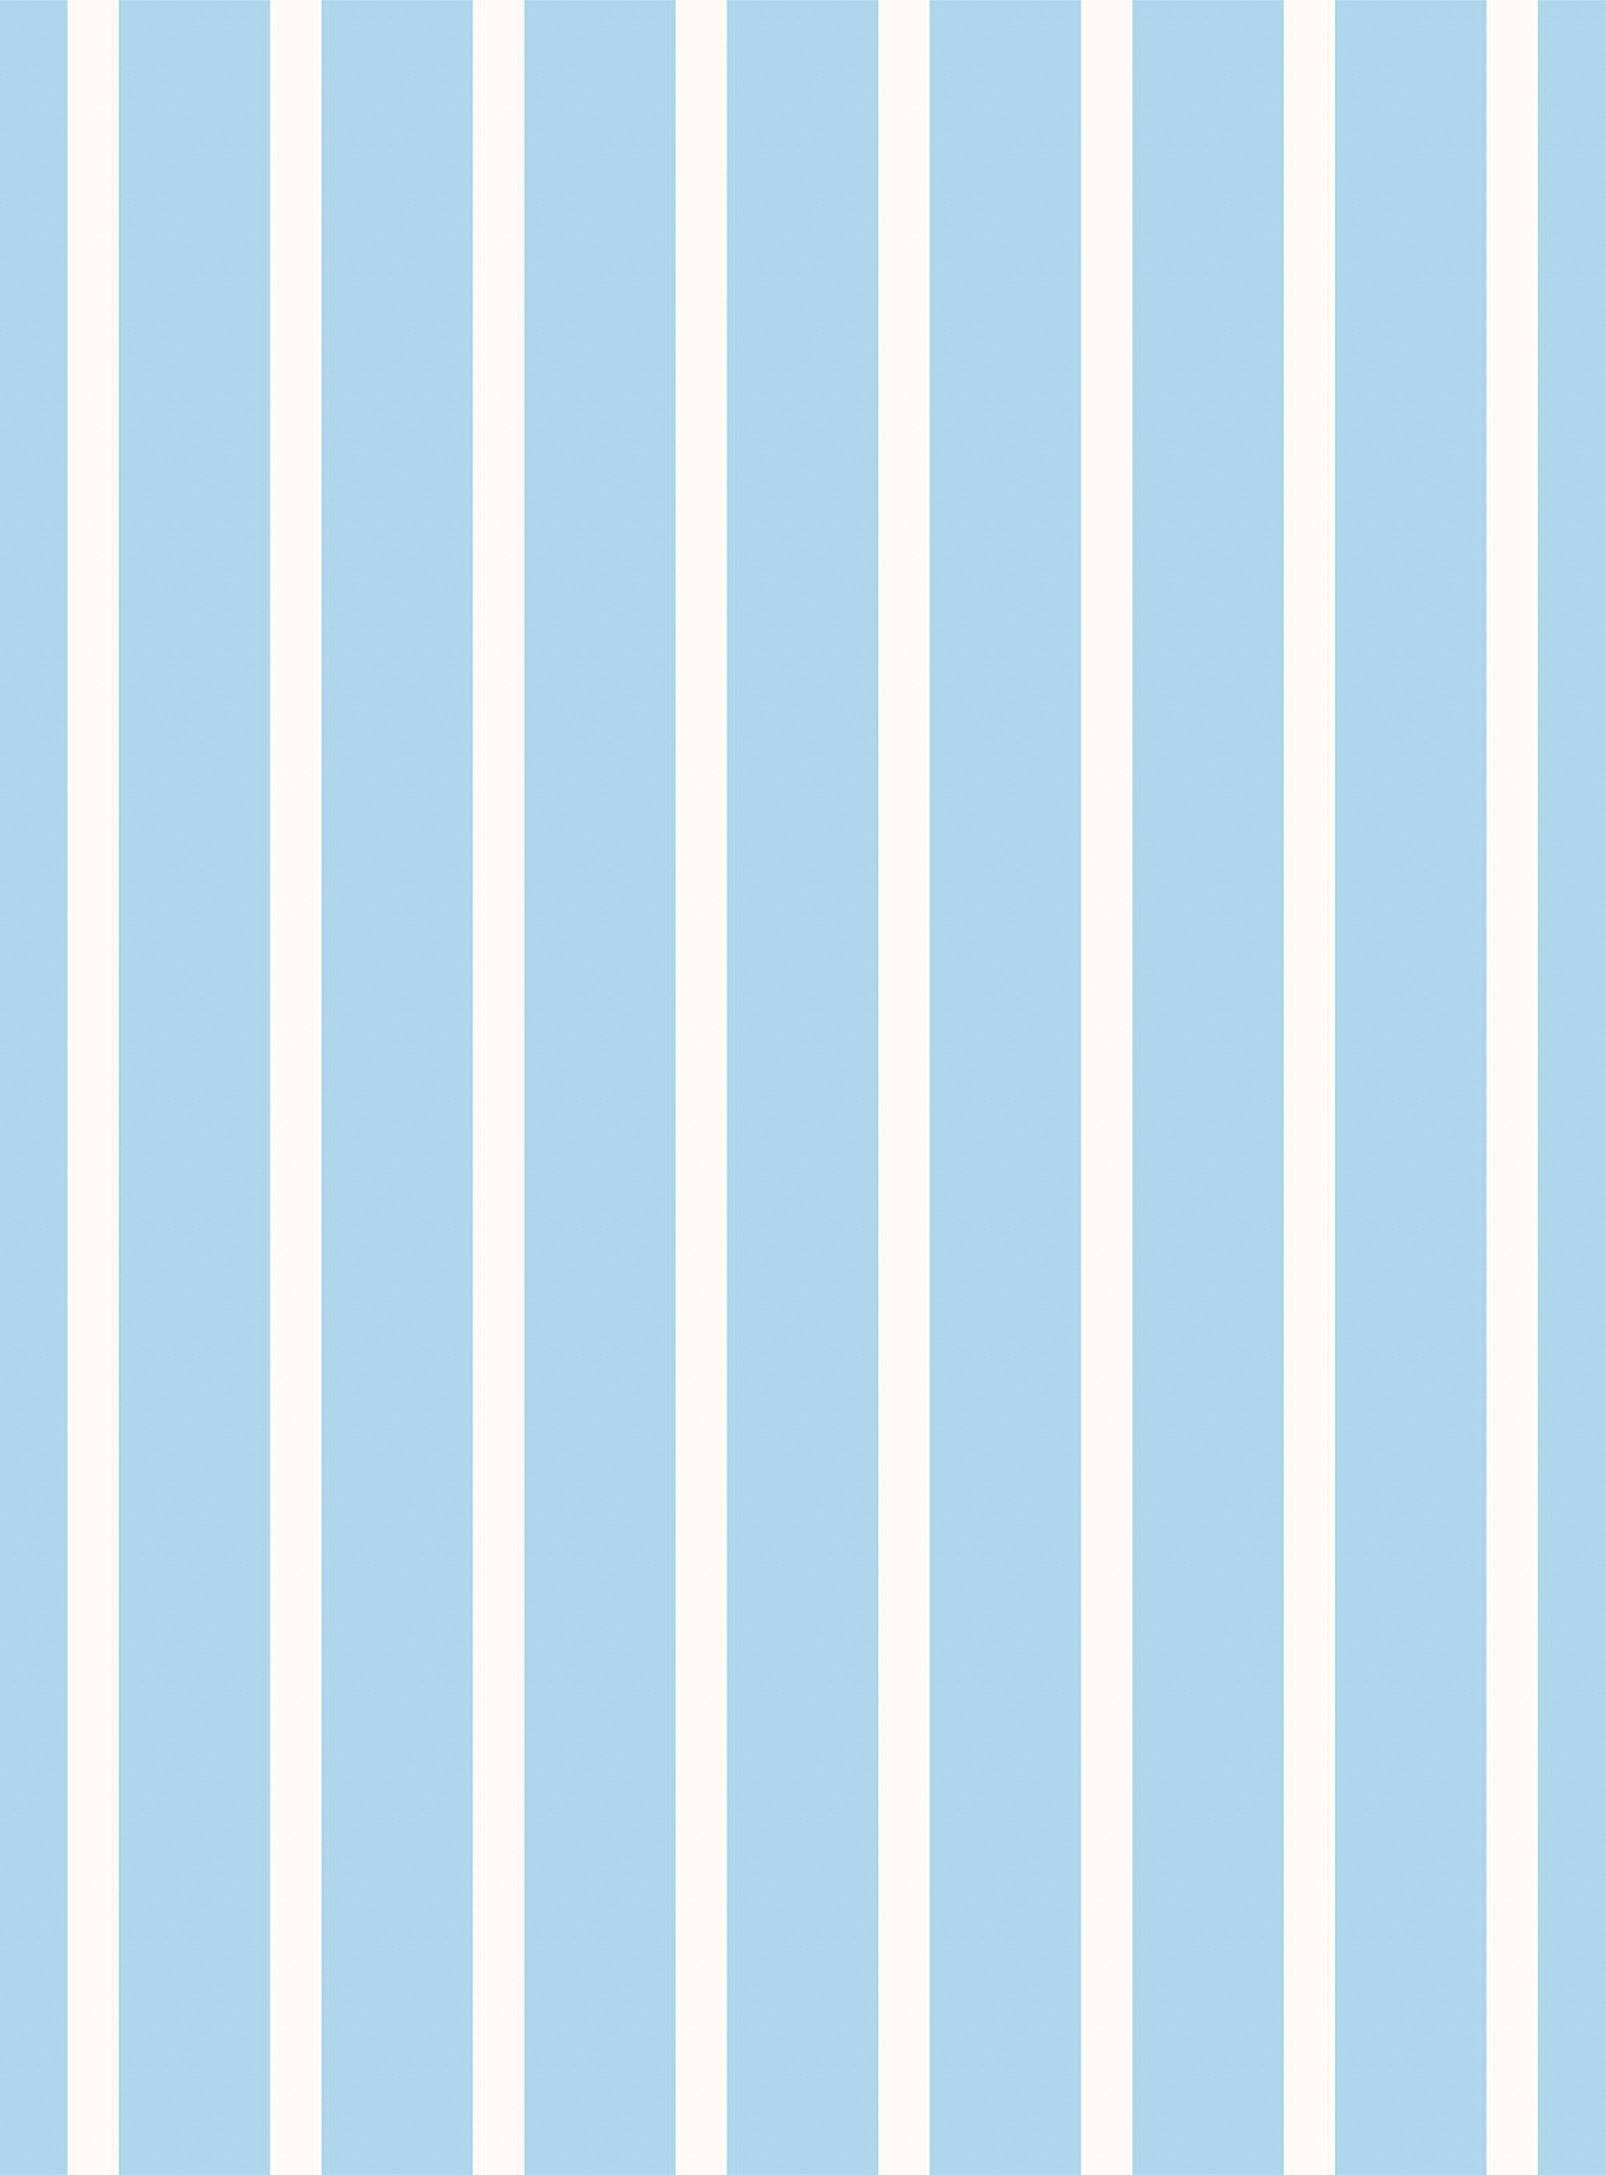 Station D Gelato Striped Wallpaper Strip See Available Sizes In Baby Blue